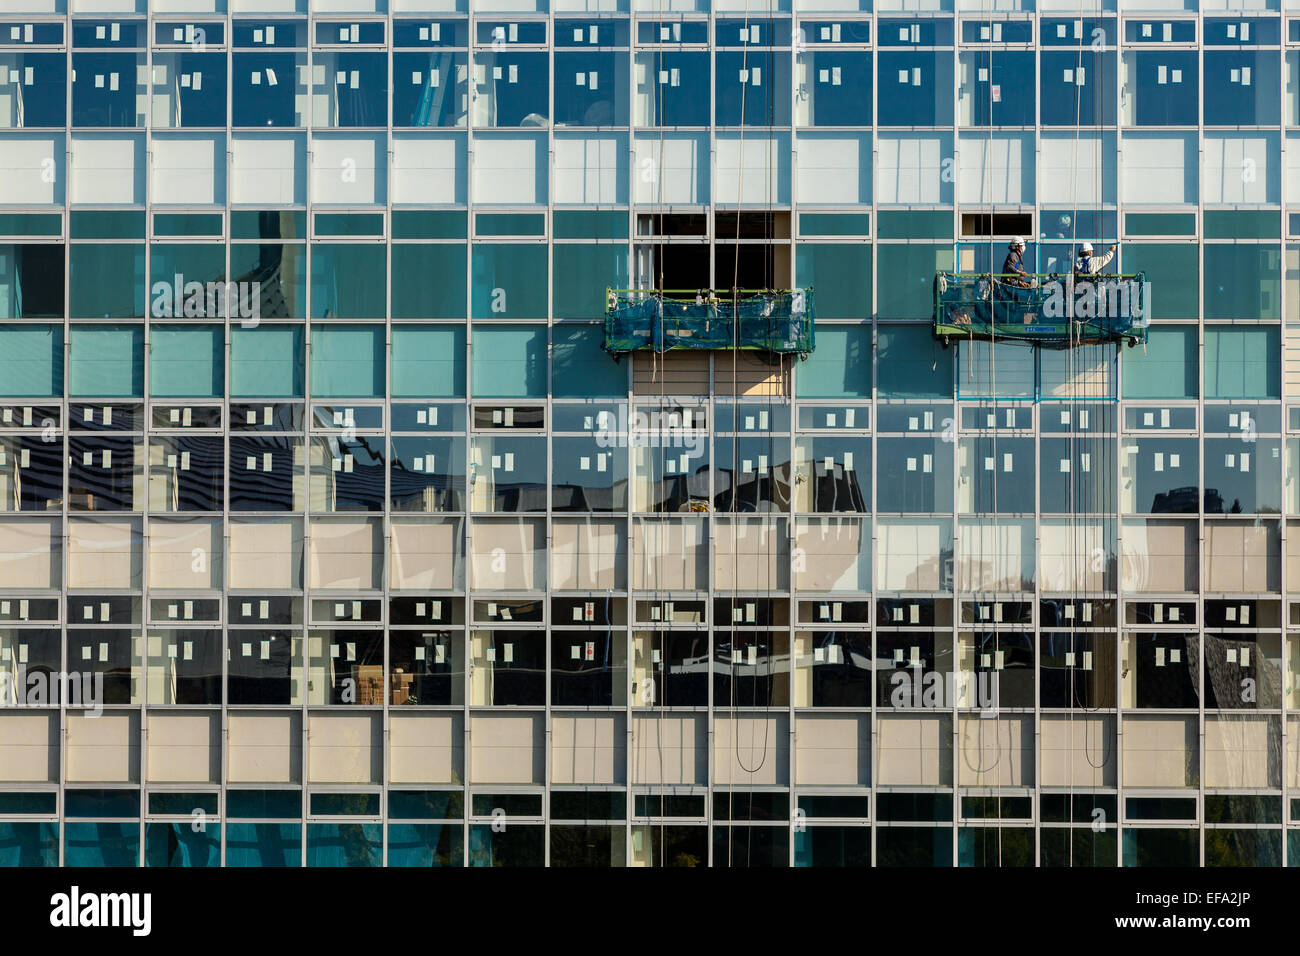 Workmen inspect the windows of a building that is being refurbished. Yoyogi National Gymnasium is reflected in the windows. Tokyo, Japan Stock Photo